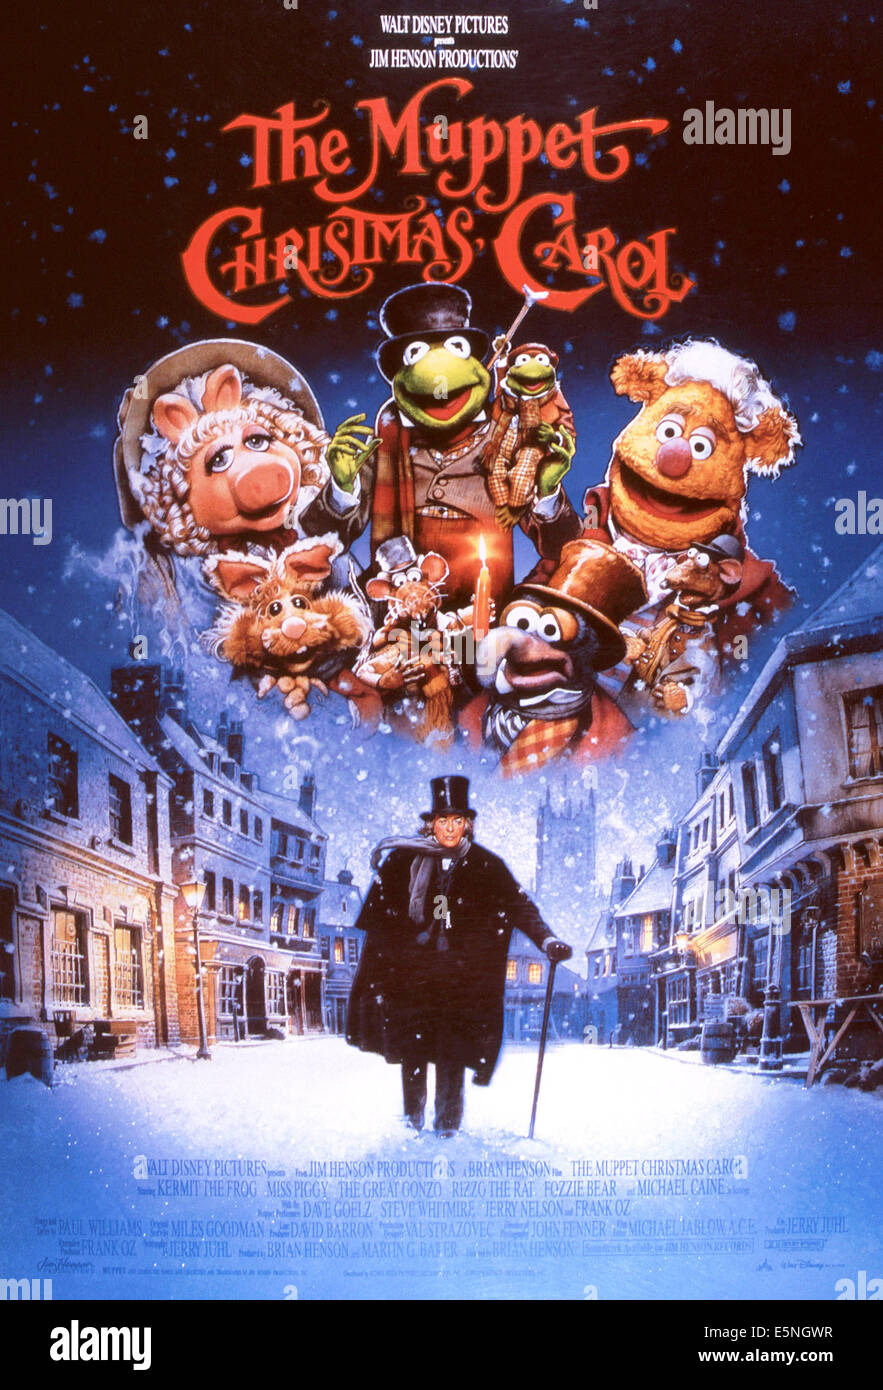 THE MUPPET CHRISTMAS CAROL top from left: Miss Piggy, Kermit the Frog, Robin (as Tiny Tim), Fozzie Bear, center l-r: Bean Stock Photo